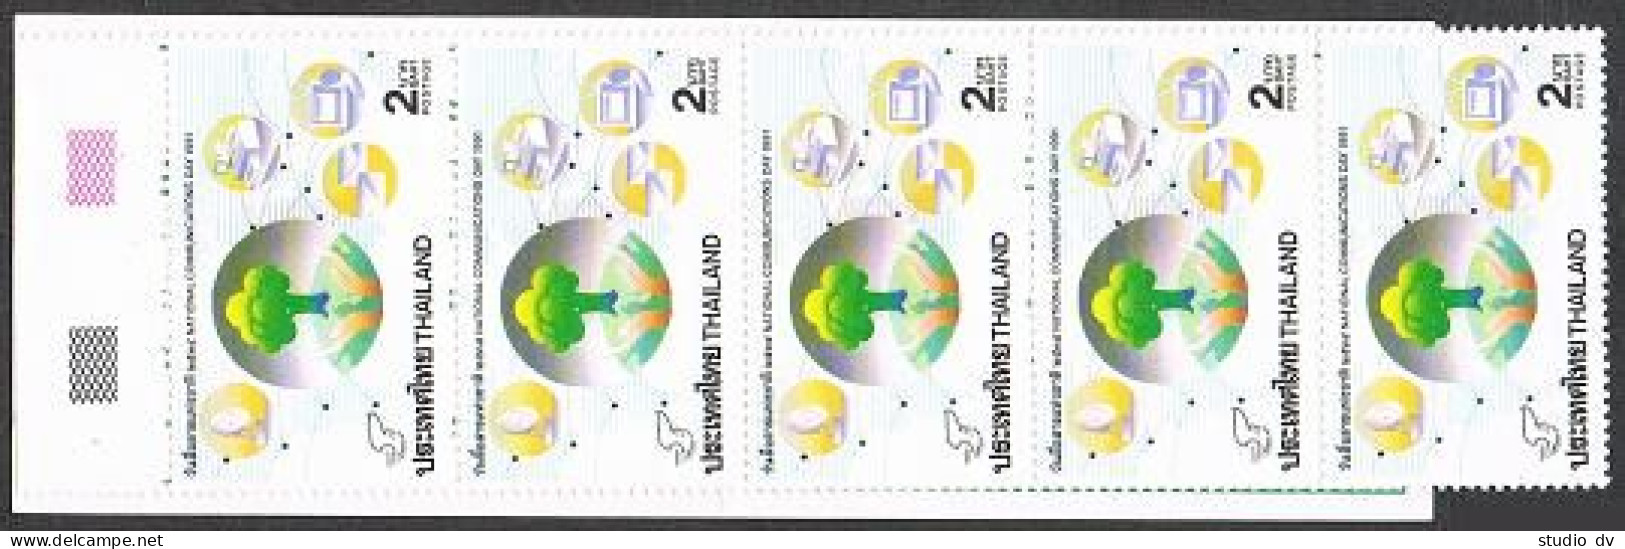 Thailand 1395 Booklet, MNH. Michel 1416 MH. Communications Day, 1991. - Thailand